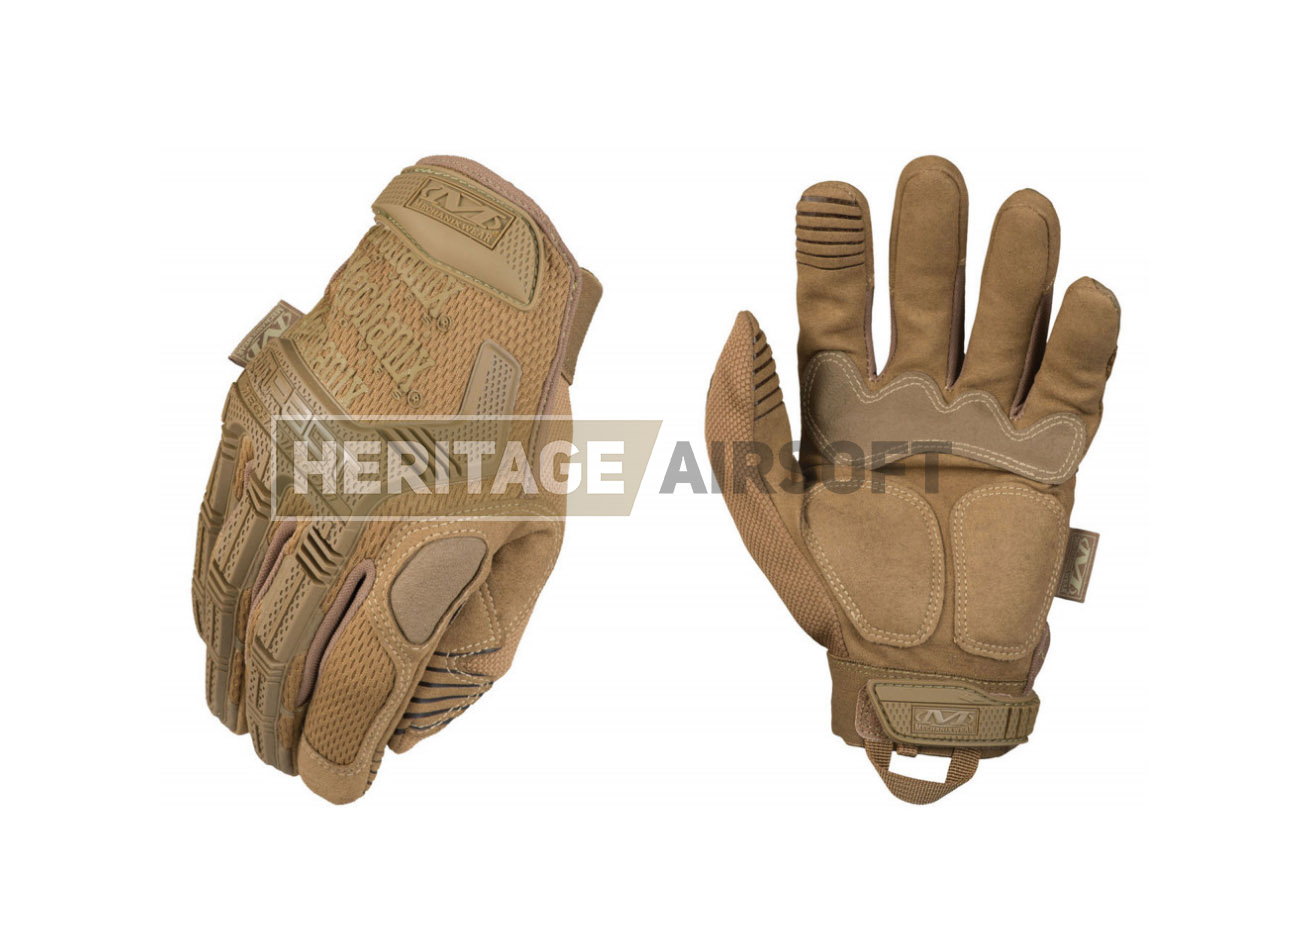 Gants d'airsoft M-Pact - Coyote - Mechanix - Heritage Airsoft